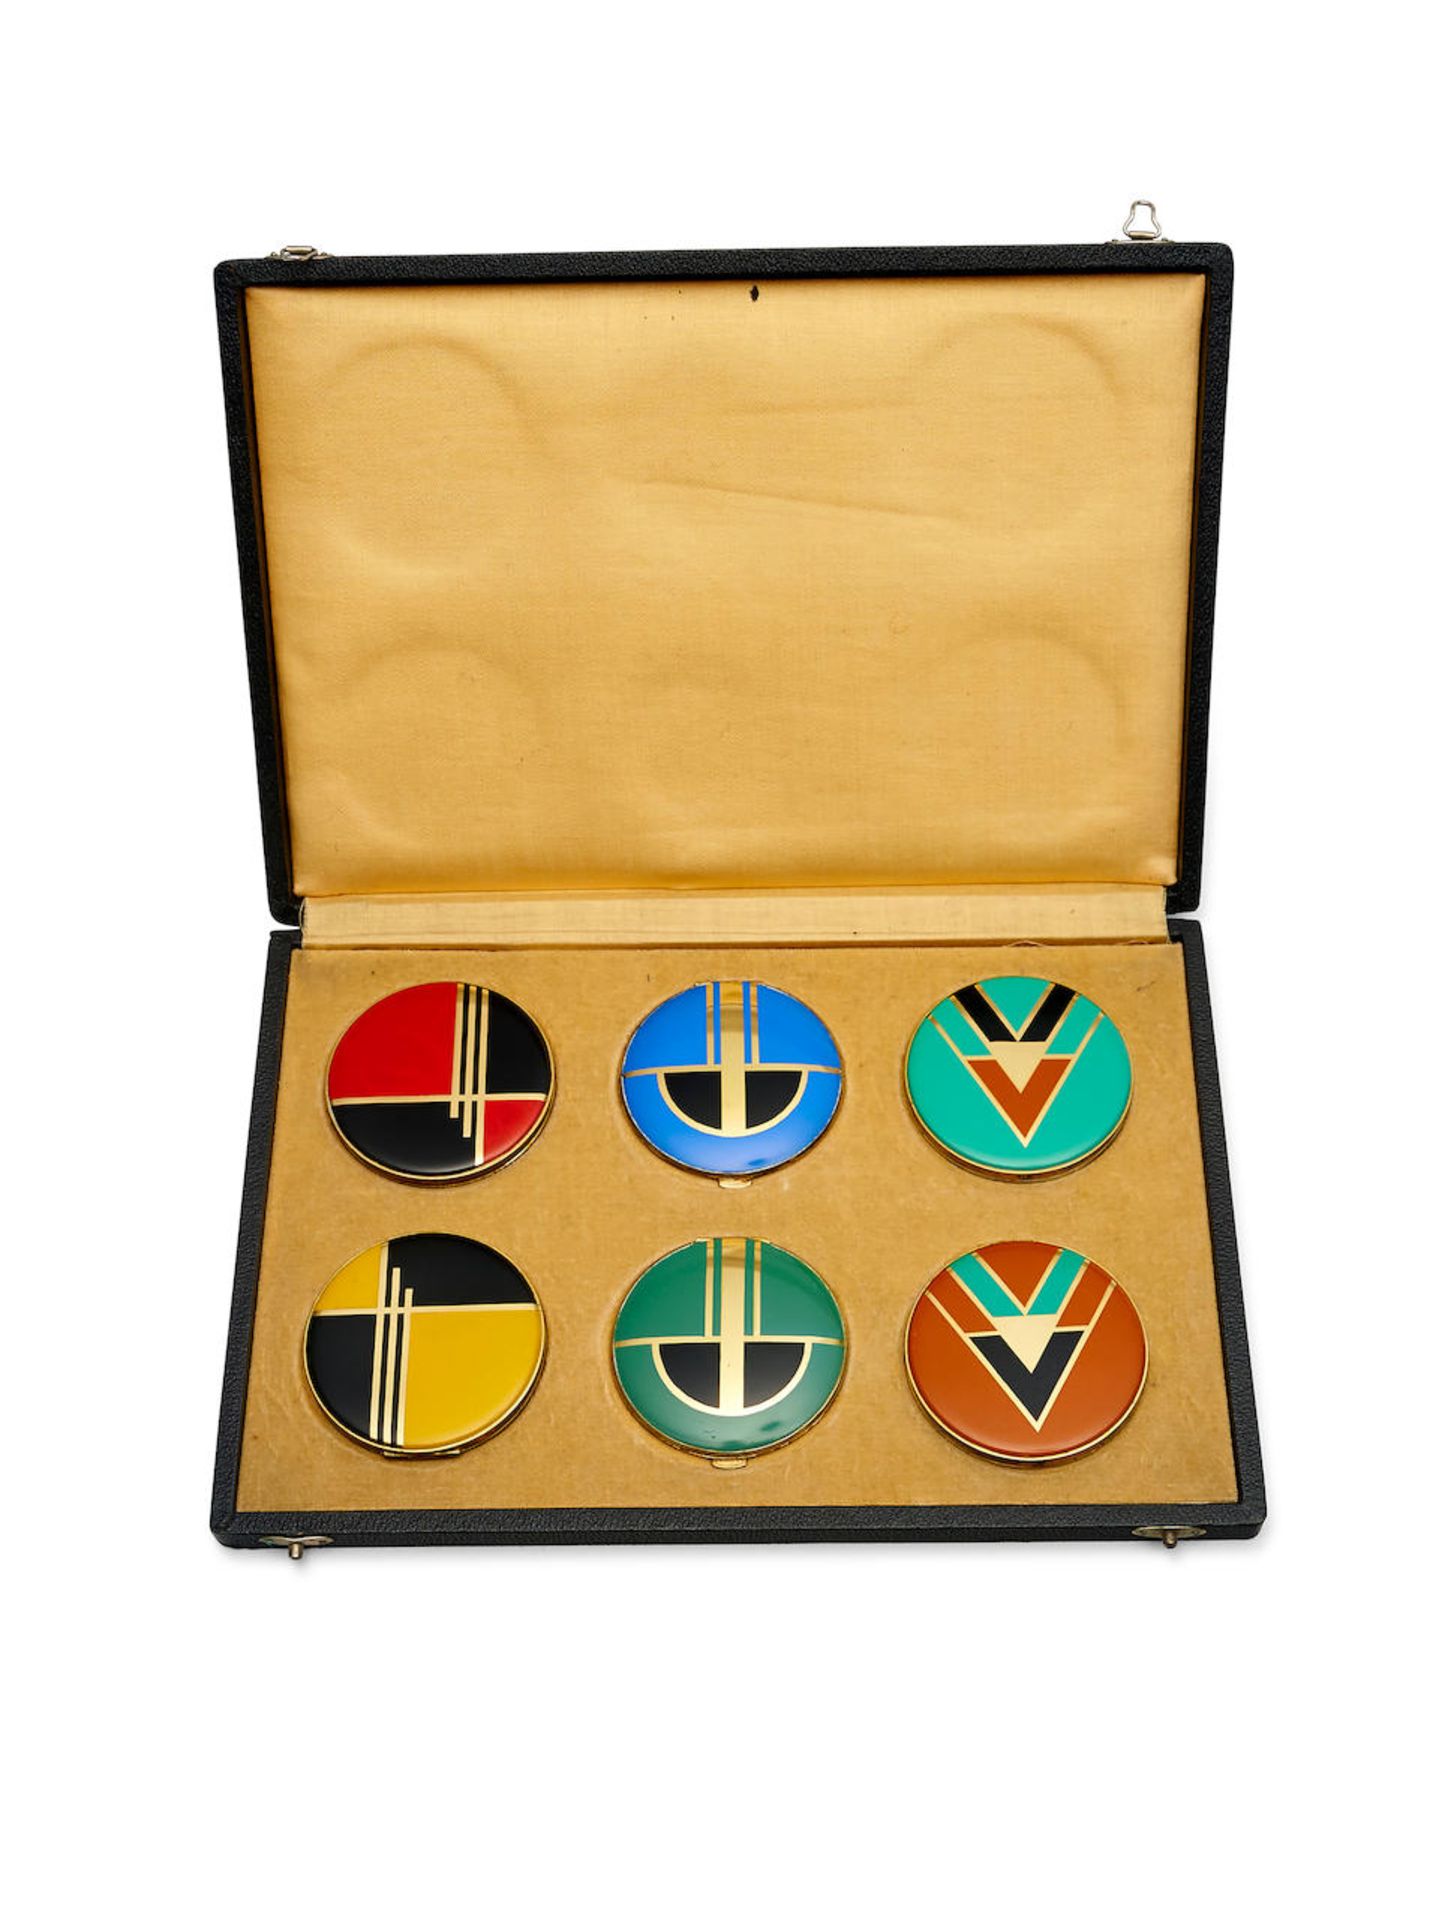 A GROUP OF SIX ENAMEL AND GILT METAL COMPACTS